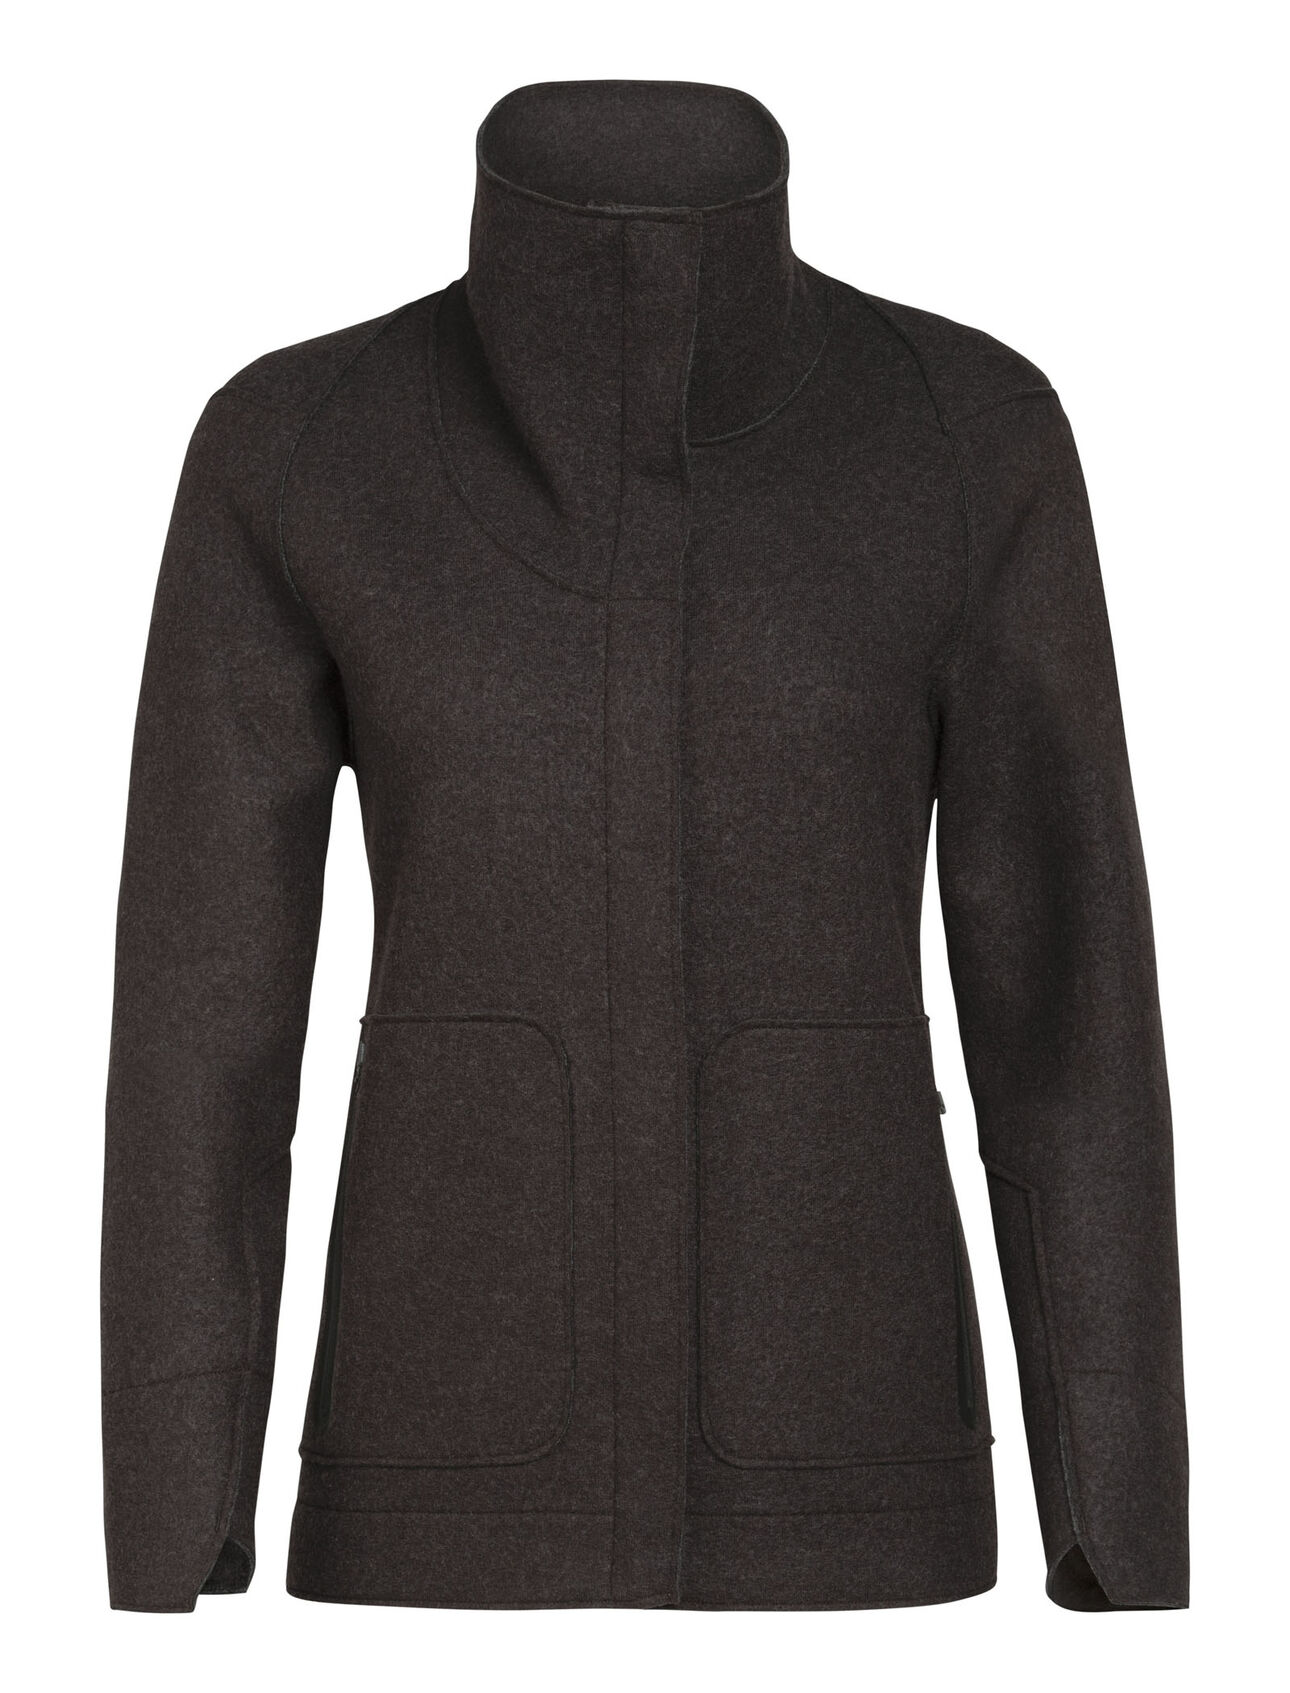 Womens Merino Oak Jacket A sustainable and stylish everyday jacket, the Oak Jacket features felted merino wool with a relaxed, modern silhouette.